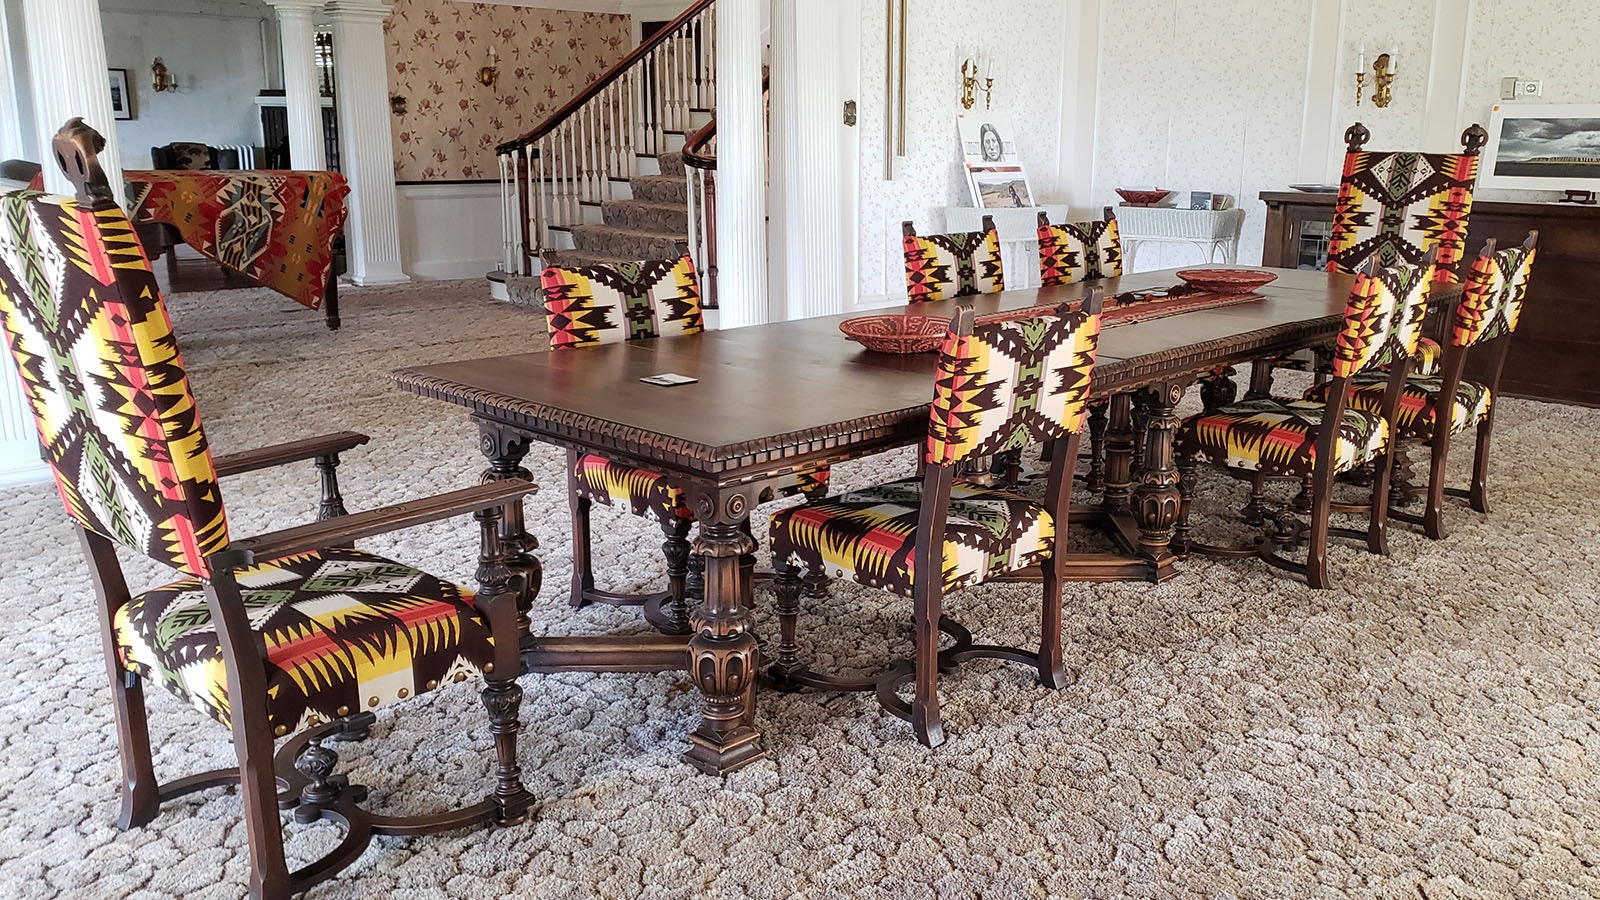 The dining table is original to the Arapaho Ranch as are the chairs, but they've been reupholstered.